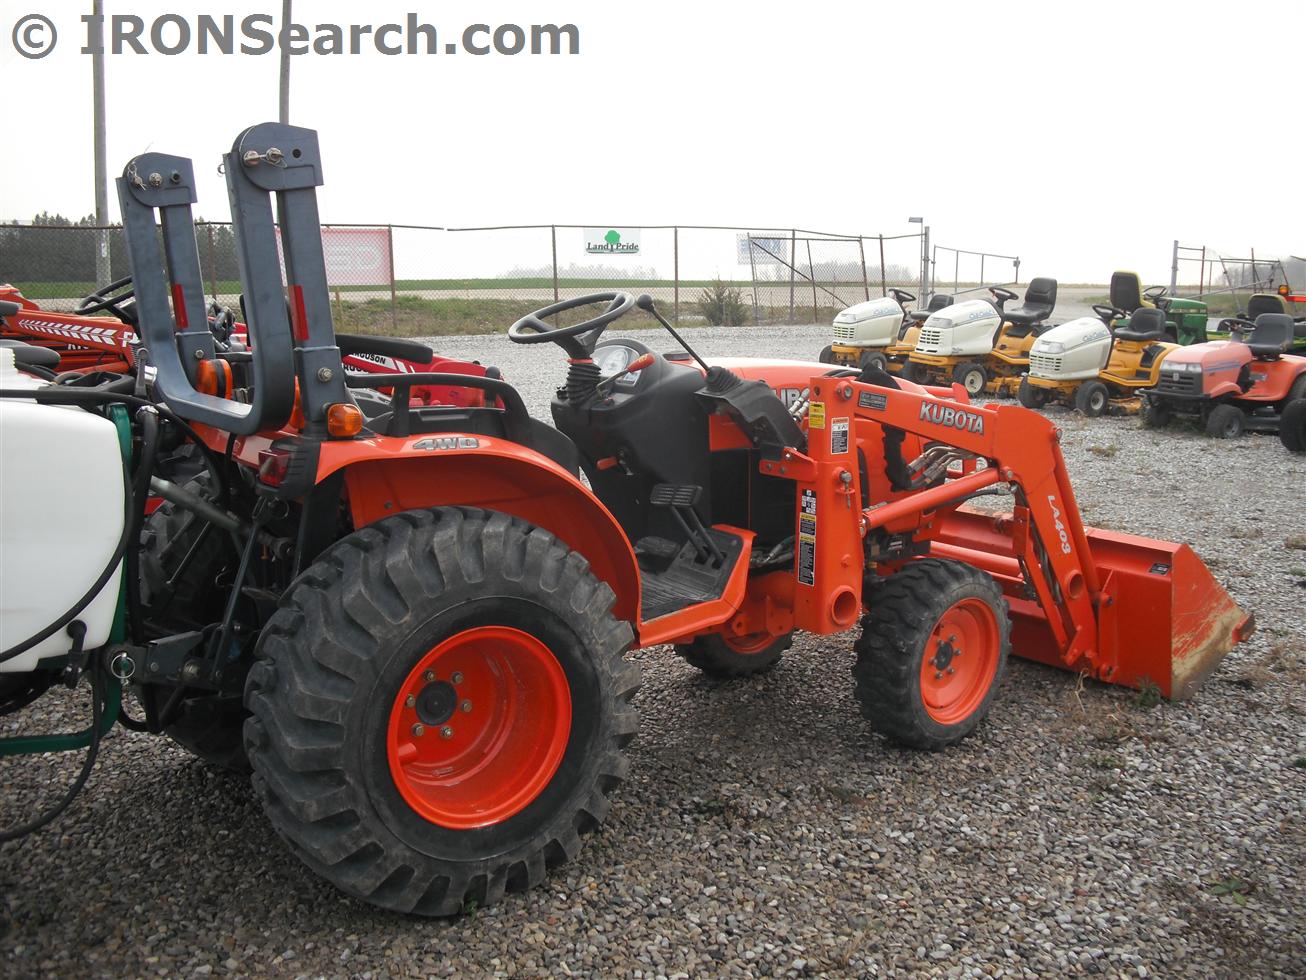 IRON Search - 2006 Kubota B3030 Tractor For Sale By Hyde Brothers ...